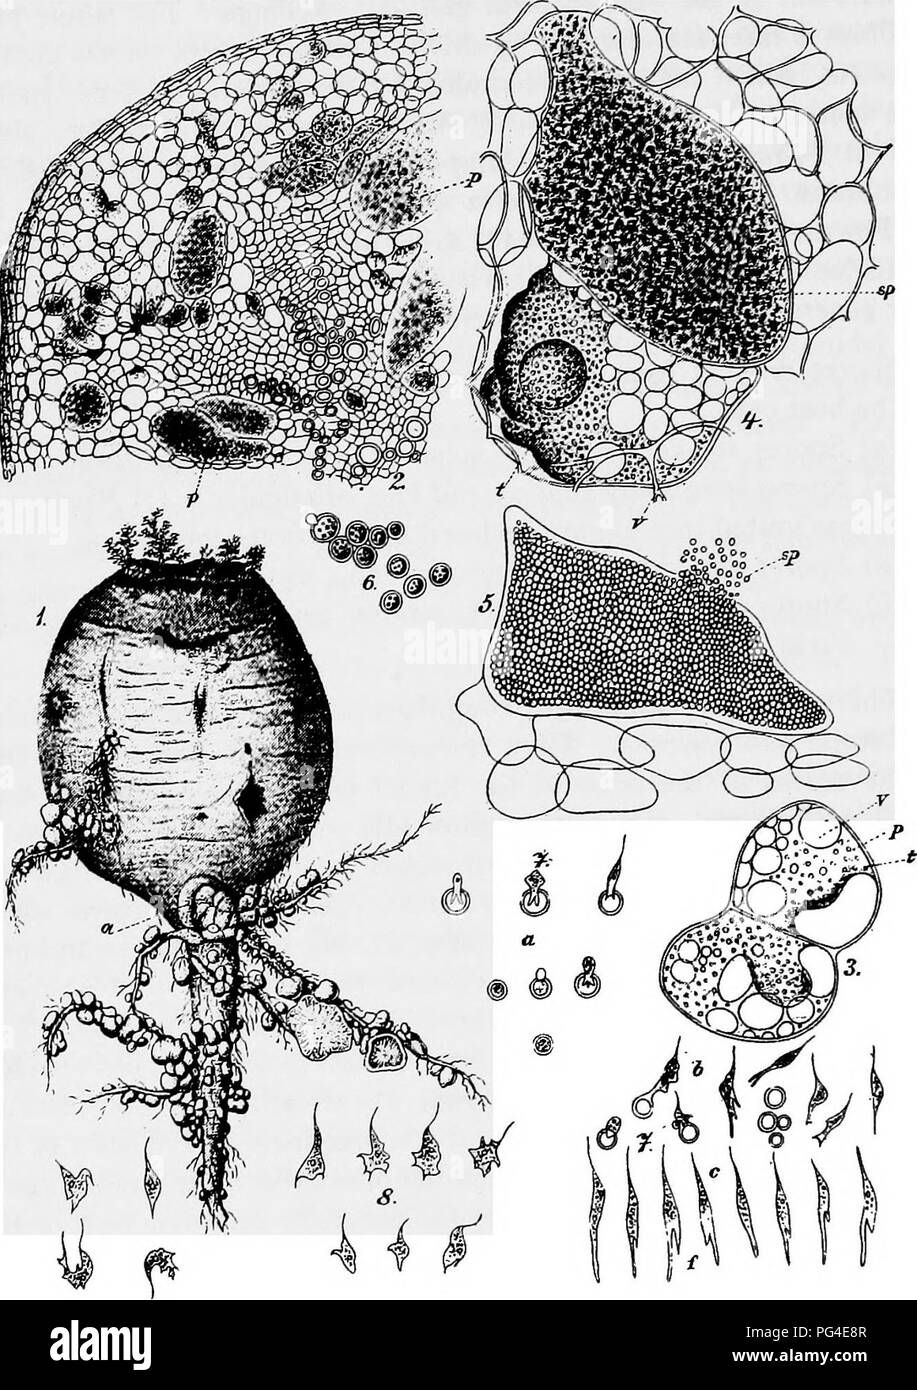 . A text-book of mycology and plant pathology . Plant diseases; Fungi in agriculture; Plant diseases; Fungi. lO MYCOLOGY. Fig. I.—Club-root of cabbage, Plasmodiophora brassica. i, Turnip with club- root; 2, section of cabbage root with parenchyma cells filled with slime mould; 3, isolated parenchyma cell, (») vacuole, (0 oil-drops in Plasmodium, {p) Plasmodium; 4, lower cell with Plasmodium, upper cell with spores developing; 5, parenchyma cell with ripe spores; 6, isolated ripe spores; 7, germinating spores; 8, myxamoeba. (Figs. 2-8, cfter Woronin in Soraucr Ilandhuch dcr Pflanzenkrankheiten. Stock Photo